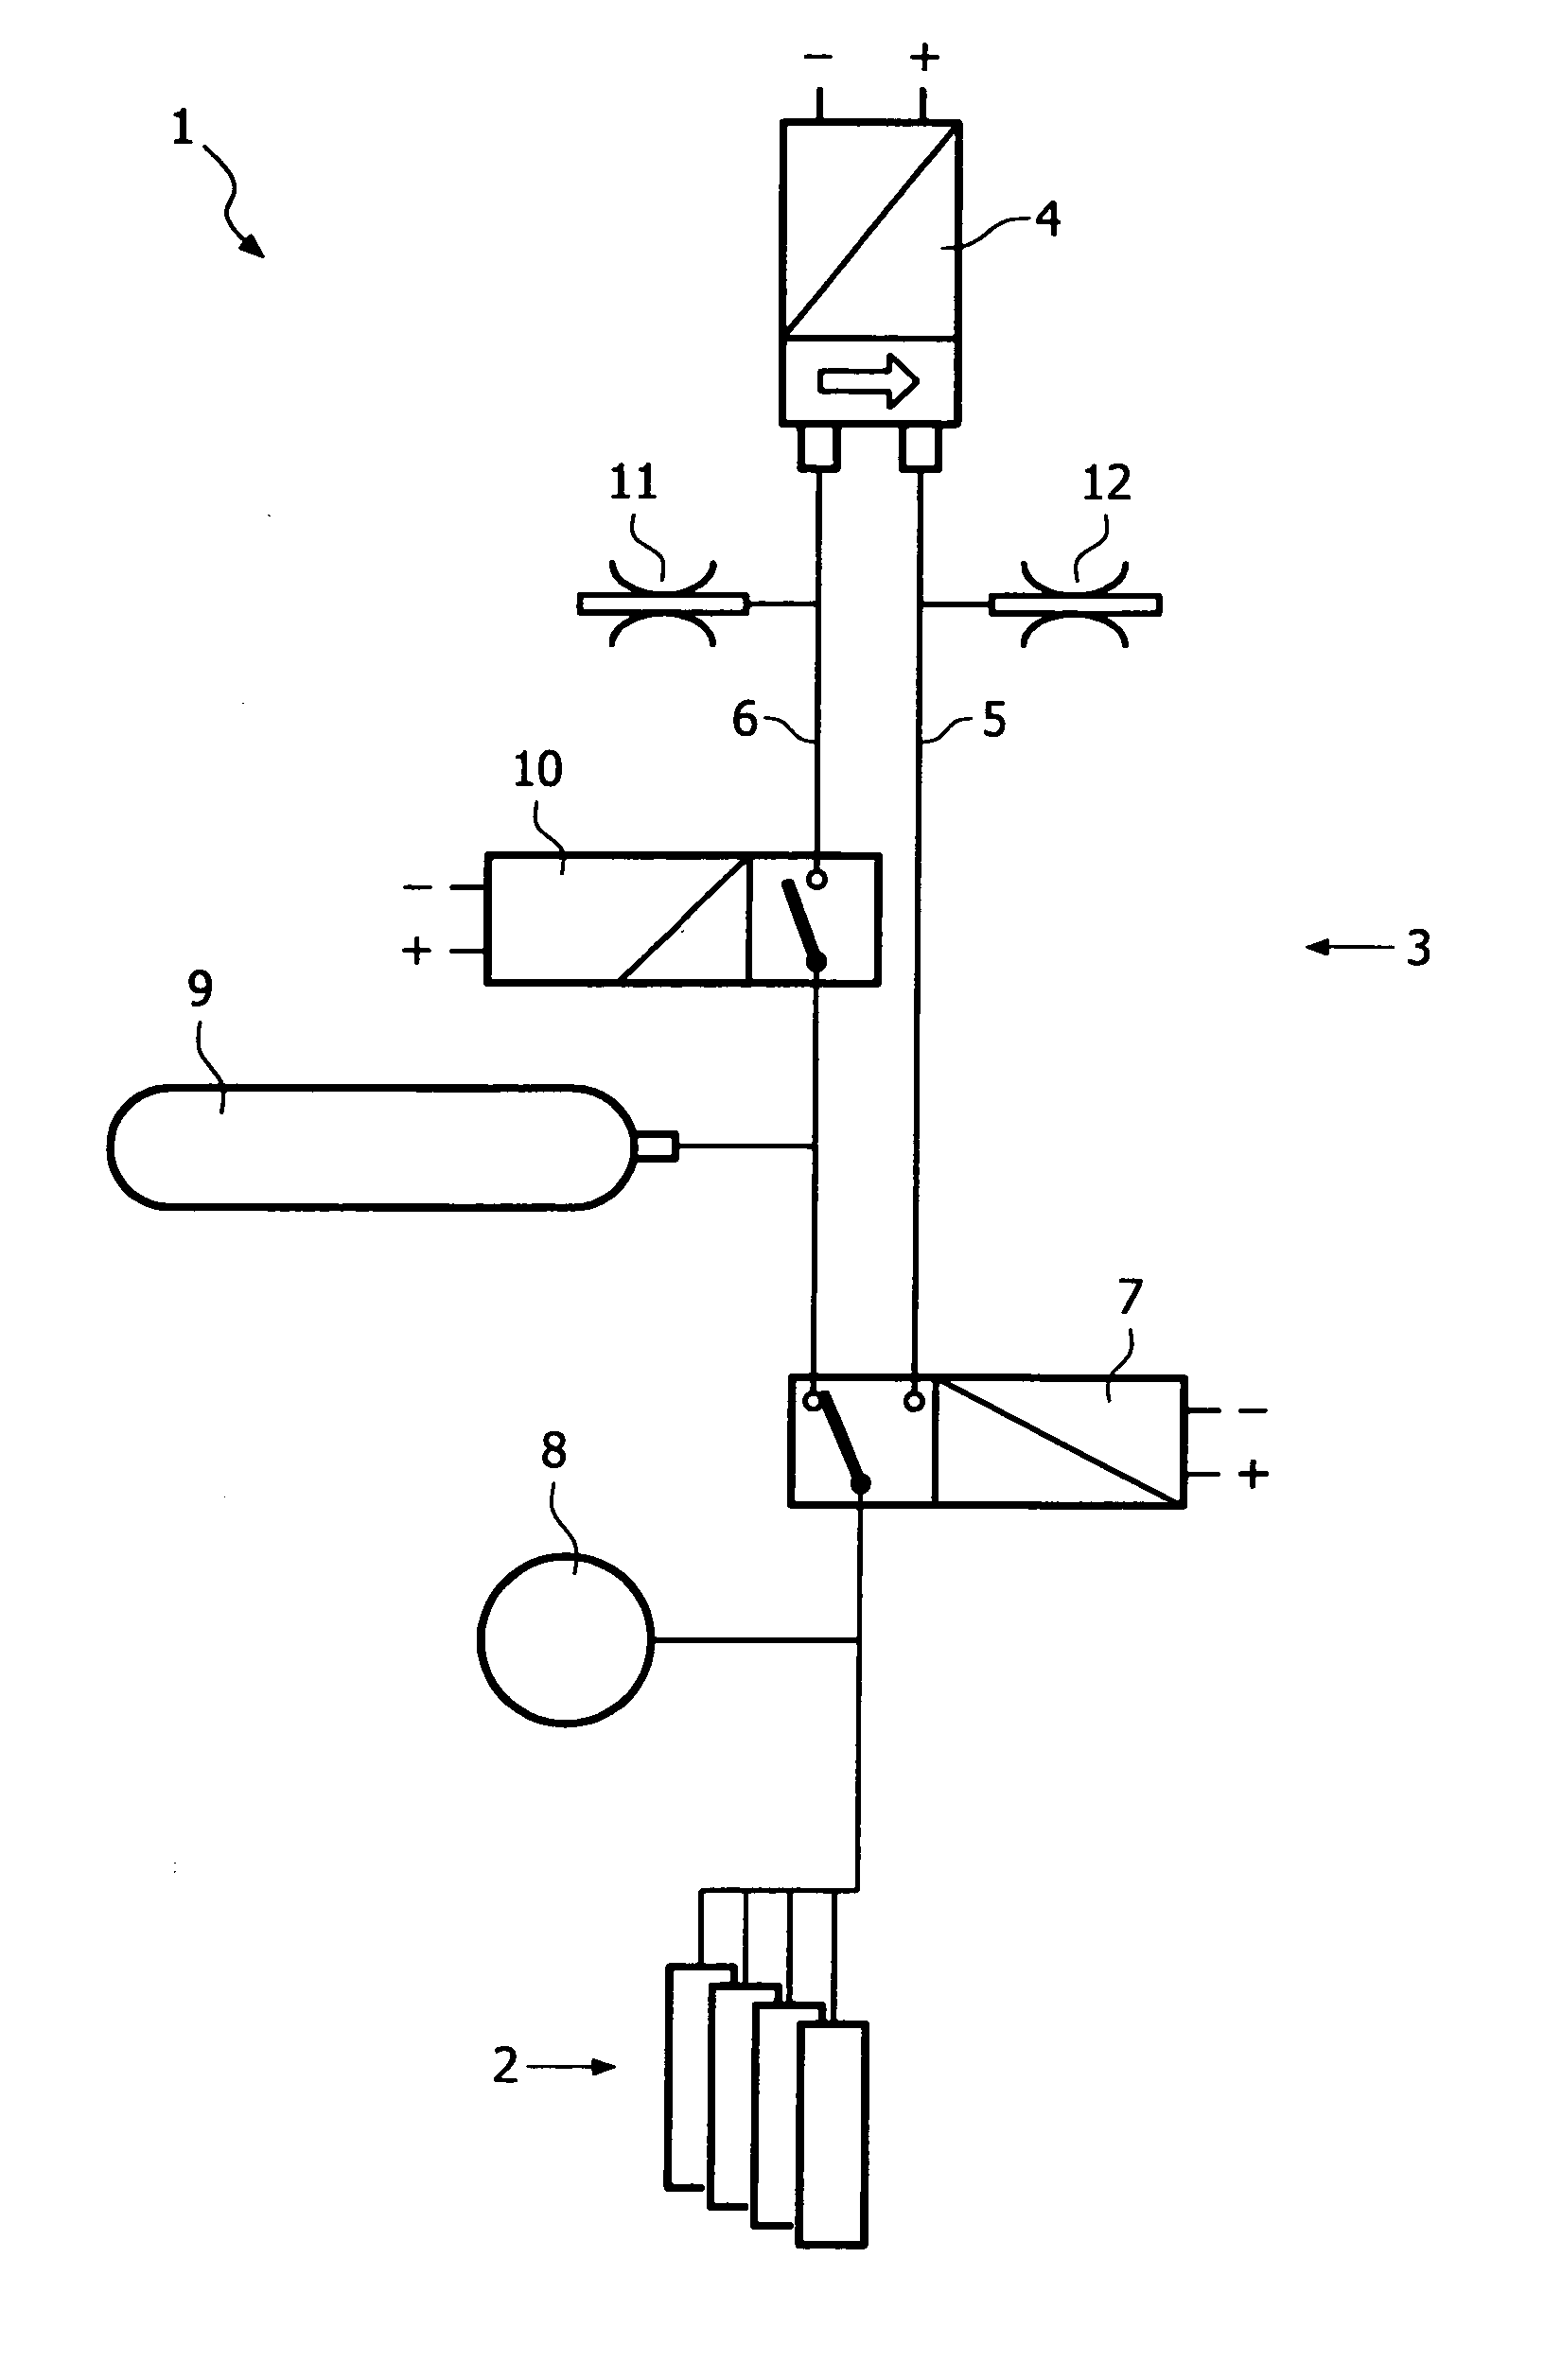 Apparatus and method for controlling the pressure in an ink reservoir of an ink jet printer